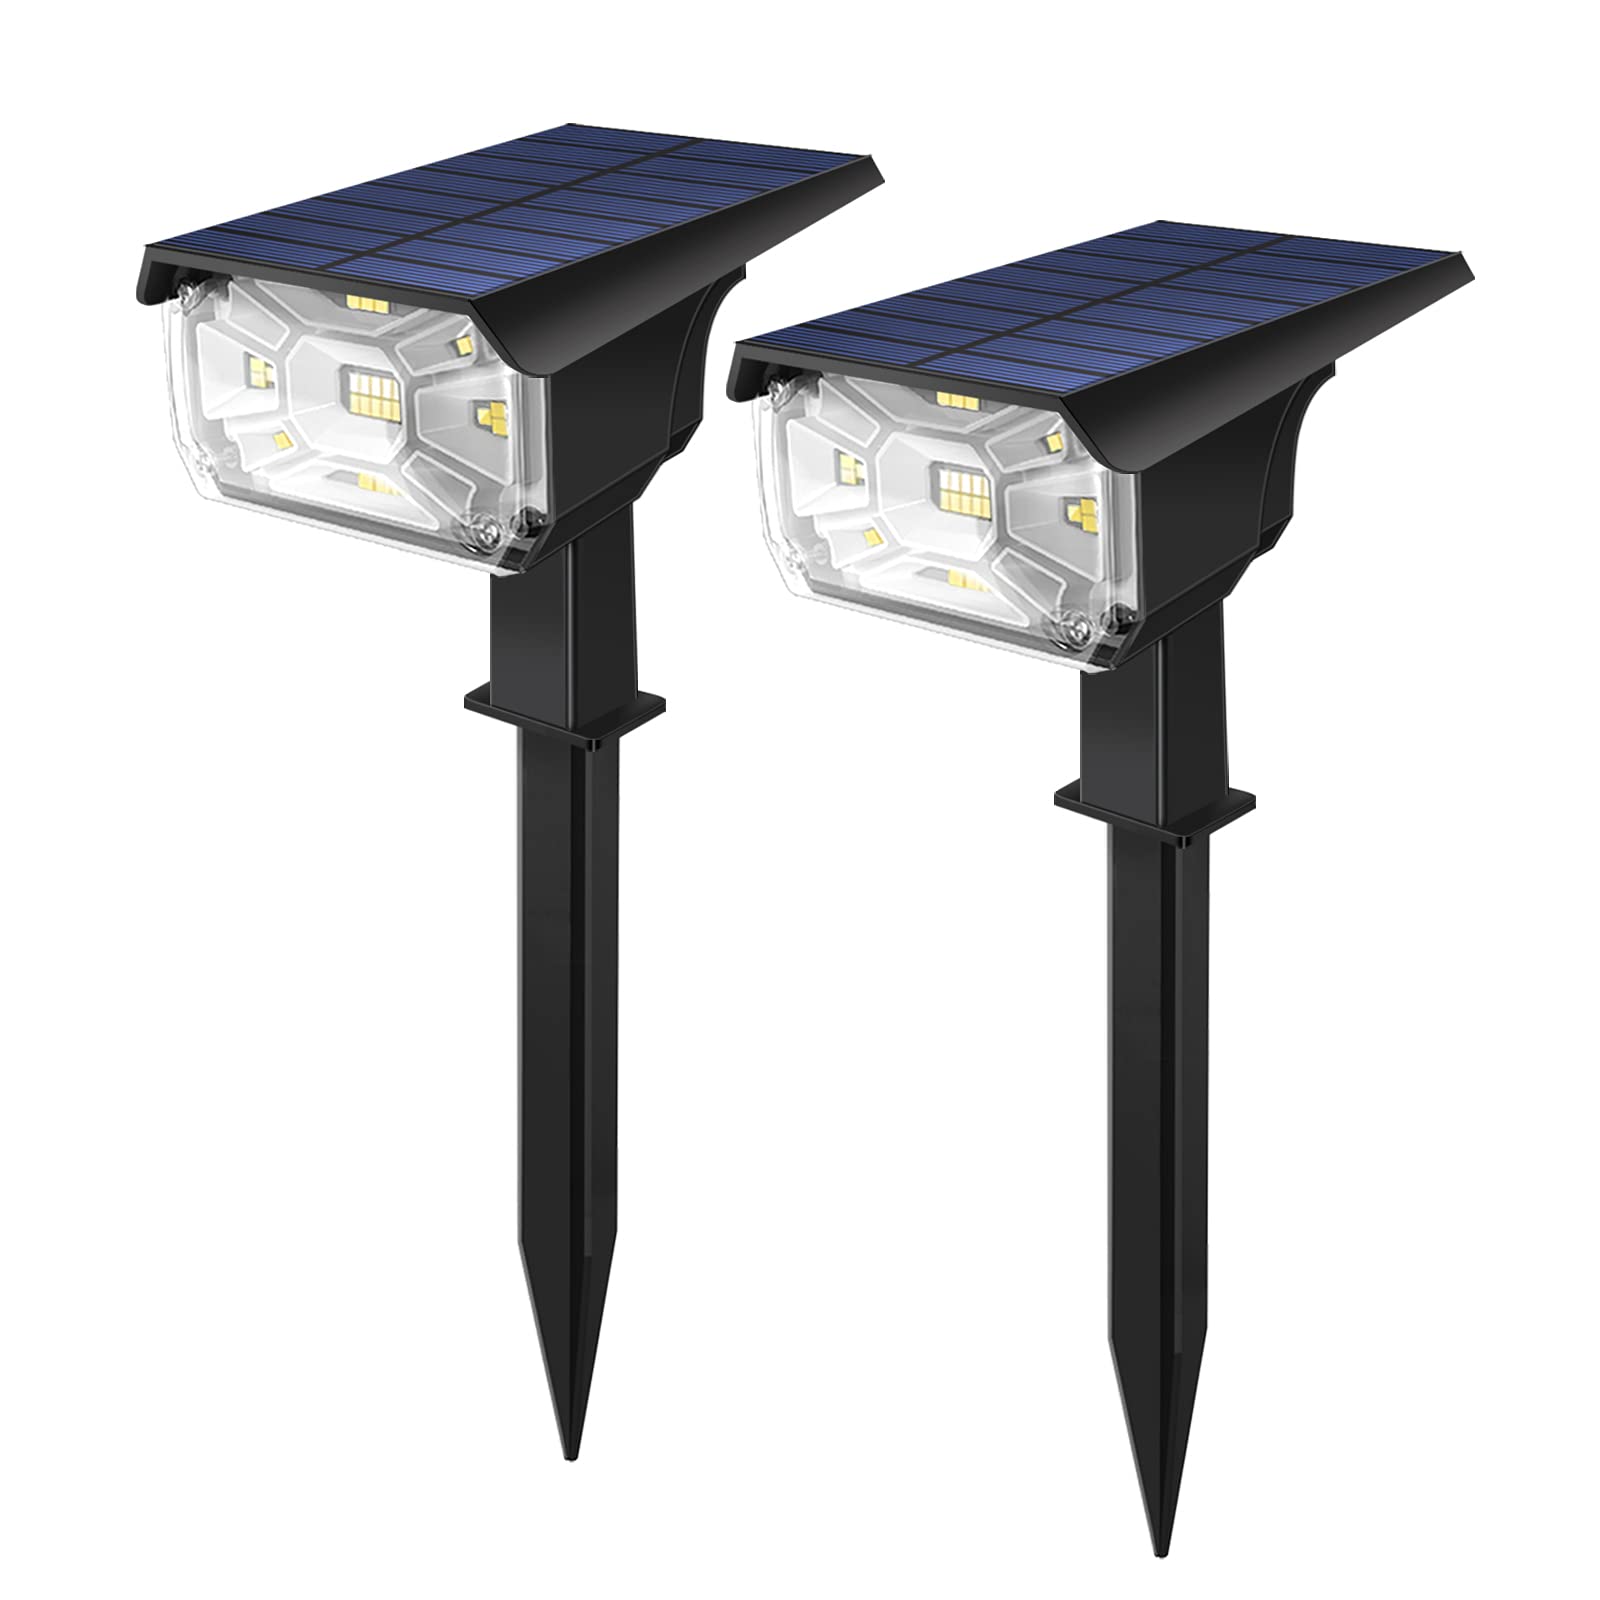 Solar spot Lights Outdoor Garden, 32 LED Solar Garden Lights Adjustable Angle Wall Lights Ip65 Waterproof, 2 Pack USB Charge Solar Landscape Spotlights for Pathway Patio Gate Yard Porch Driveway